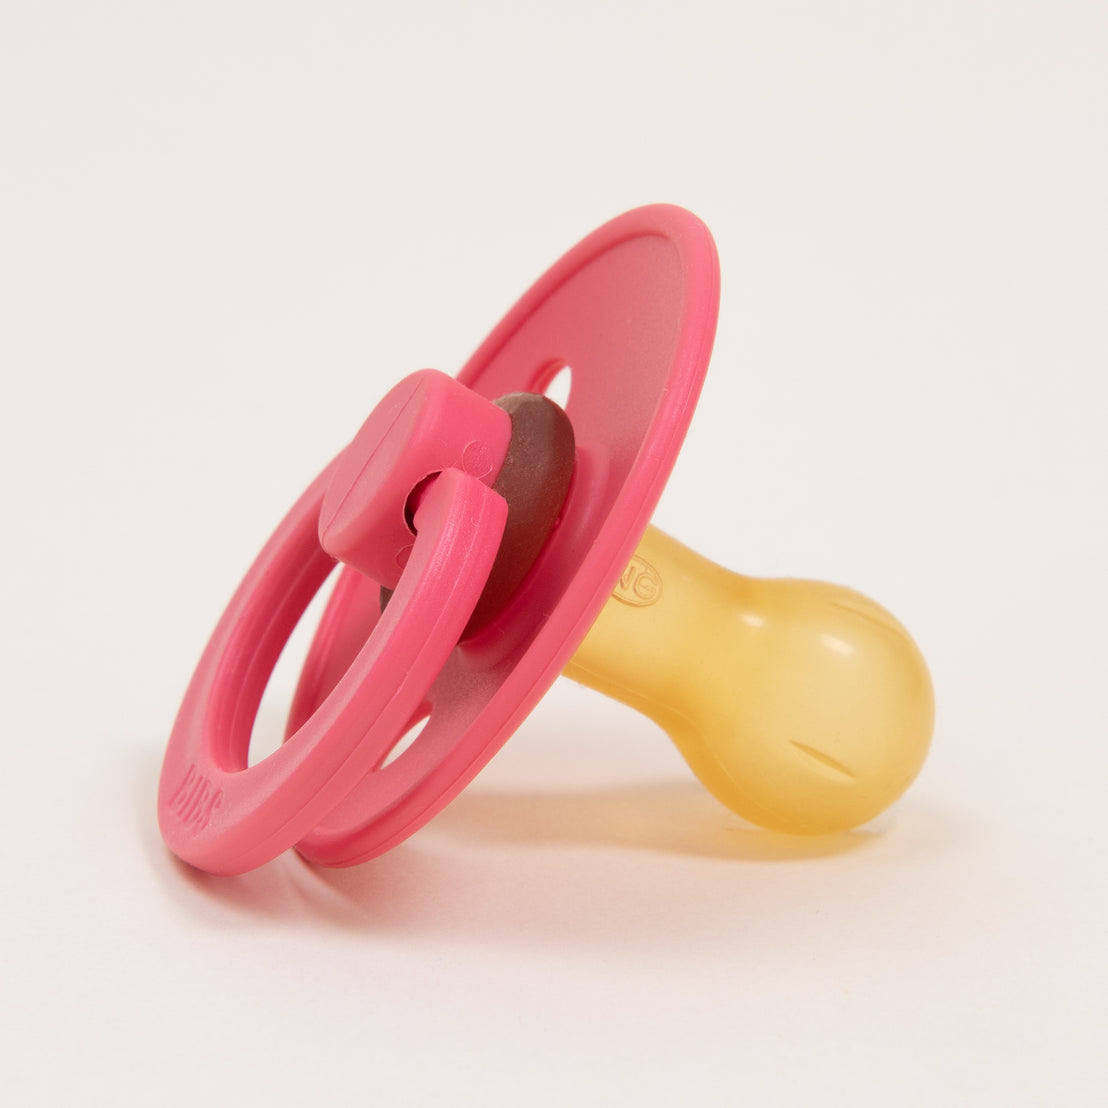 A close-up image of a pink Bibs Pacifier in Coral with a translucent yellow nipple and a circular handle on a white background.